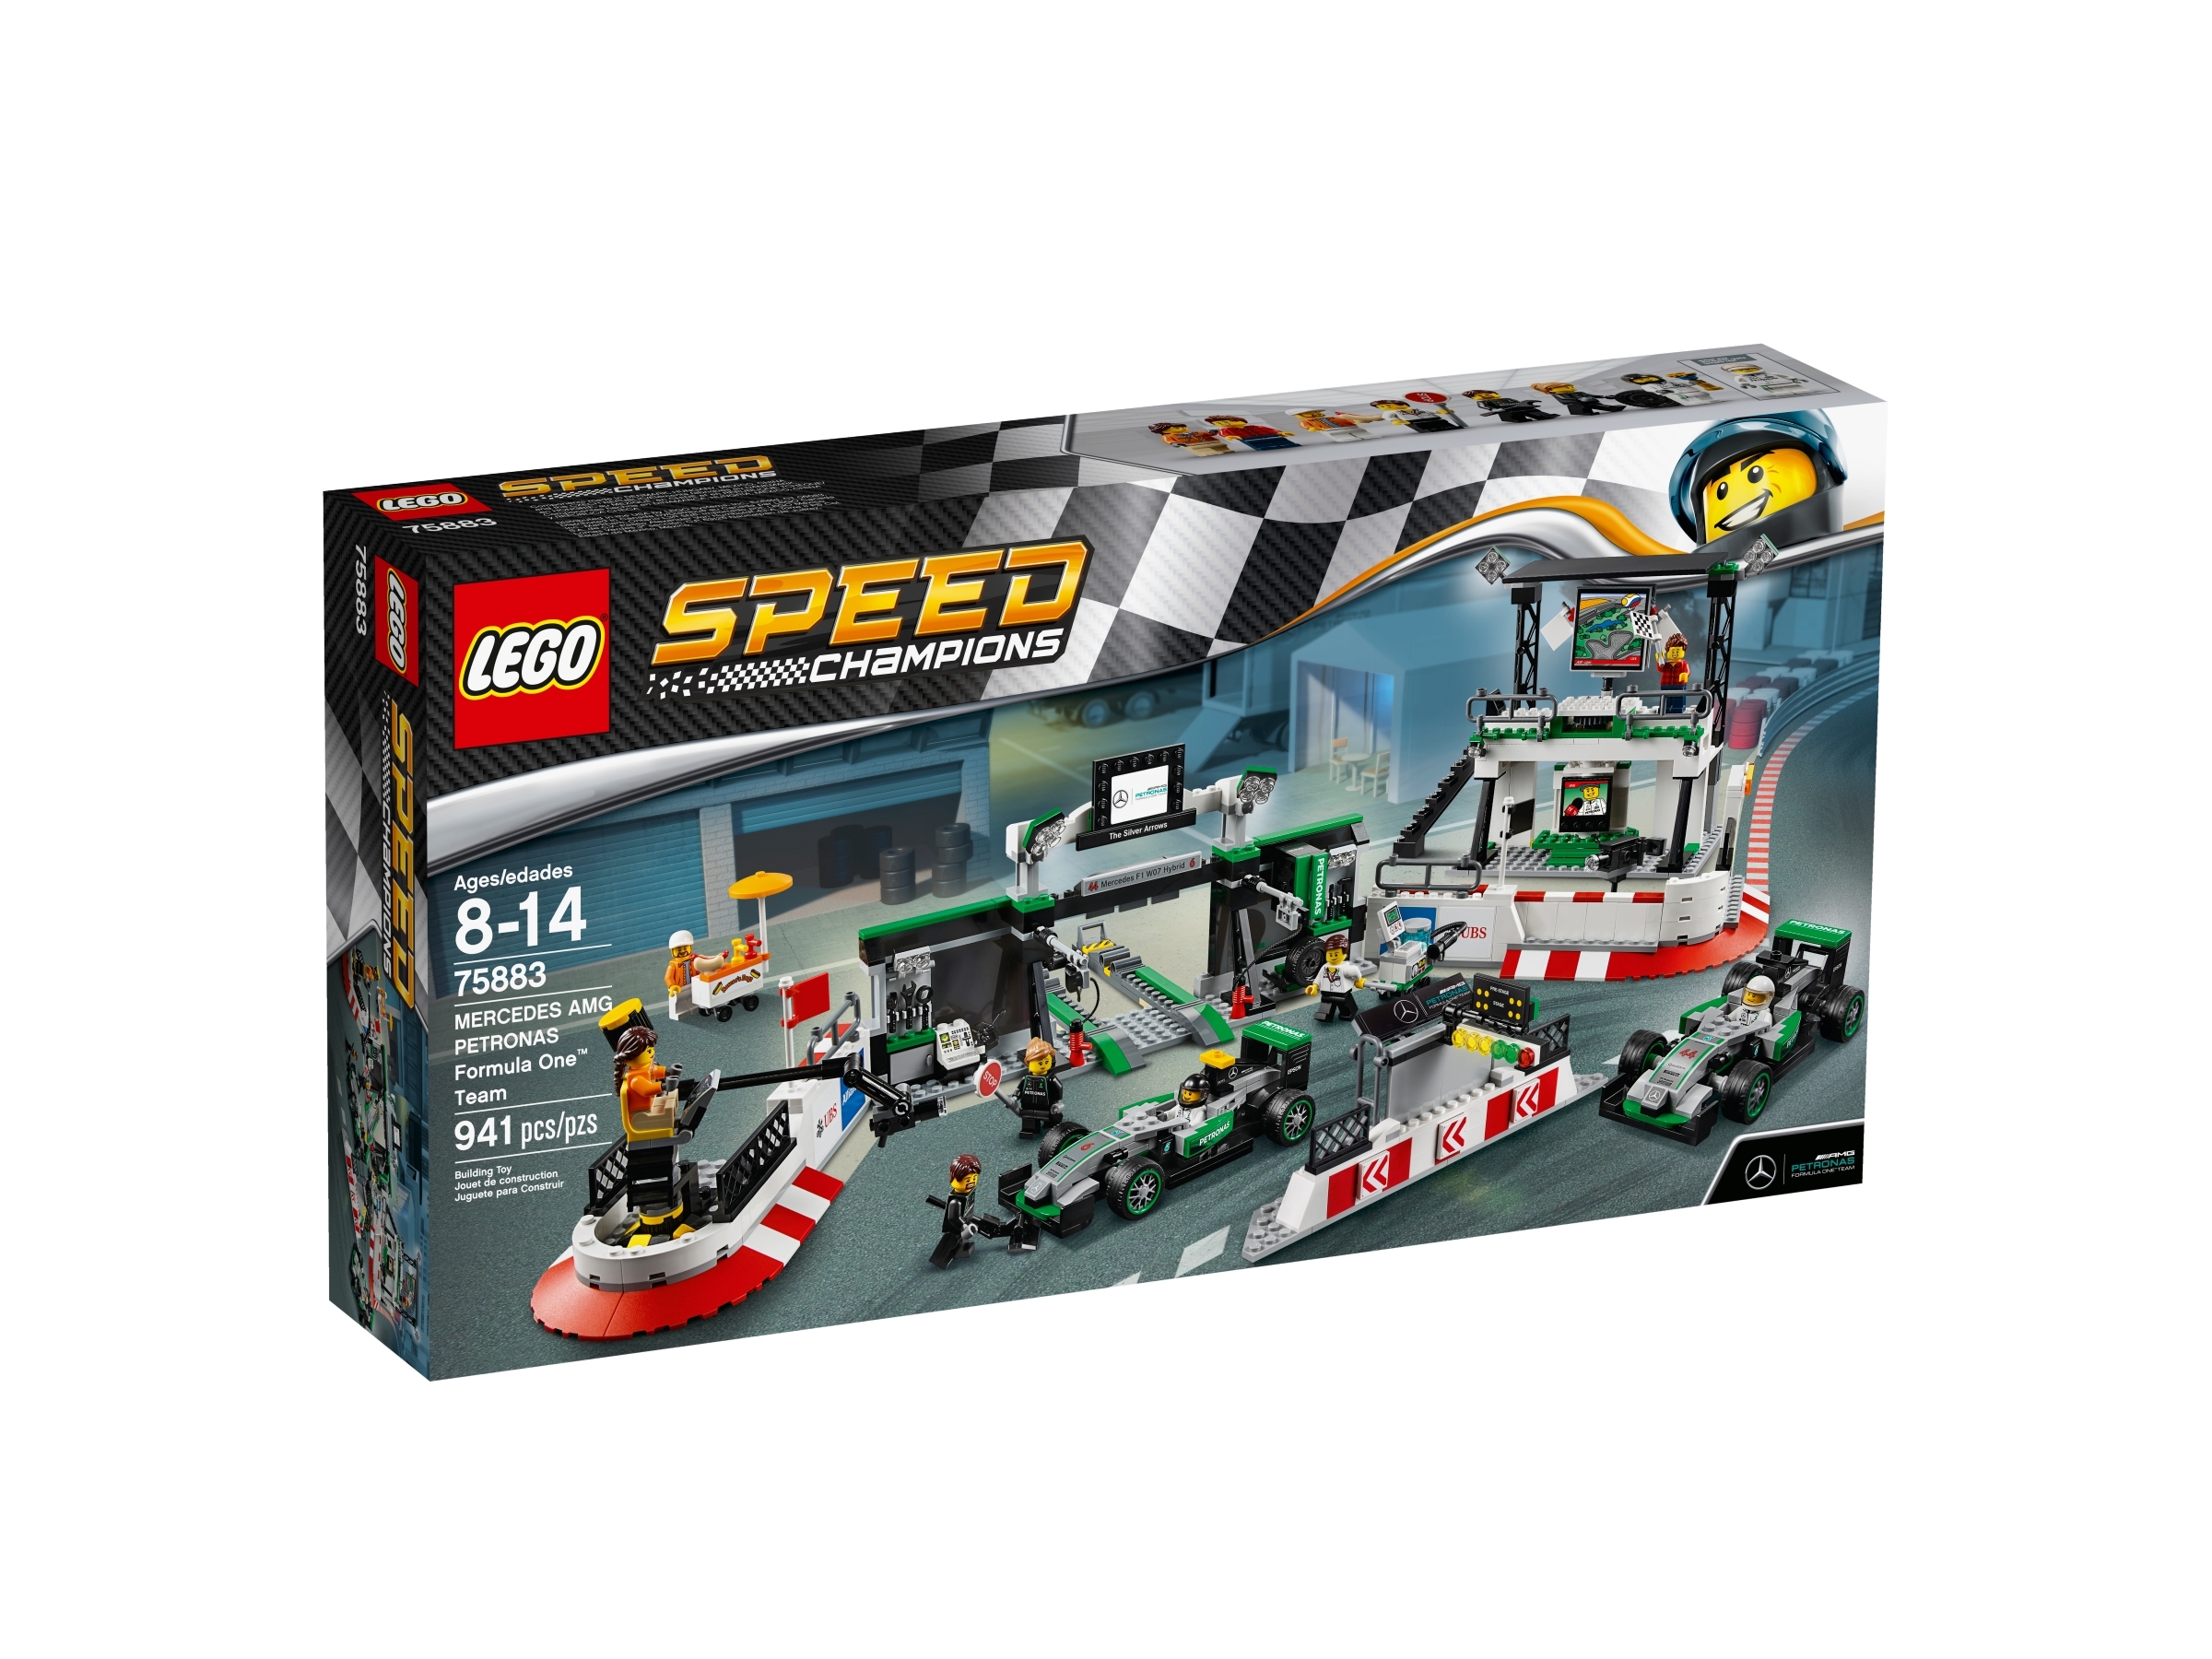 MERCEDES AMG PETRONAS One™ Team 75883 | Speed Champions Buy online at Official LEGO® Shop US